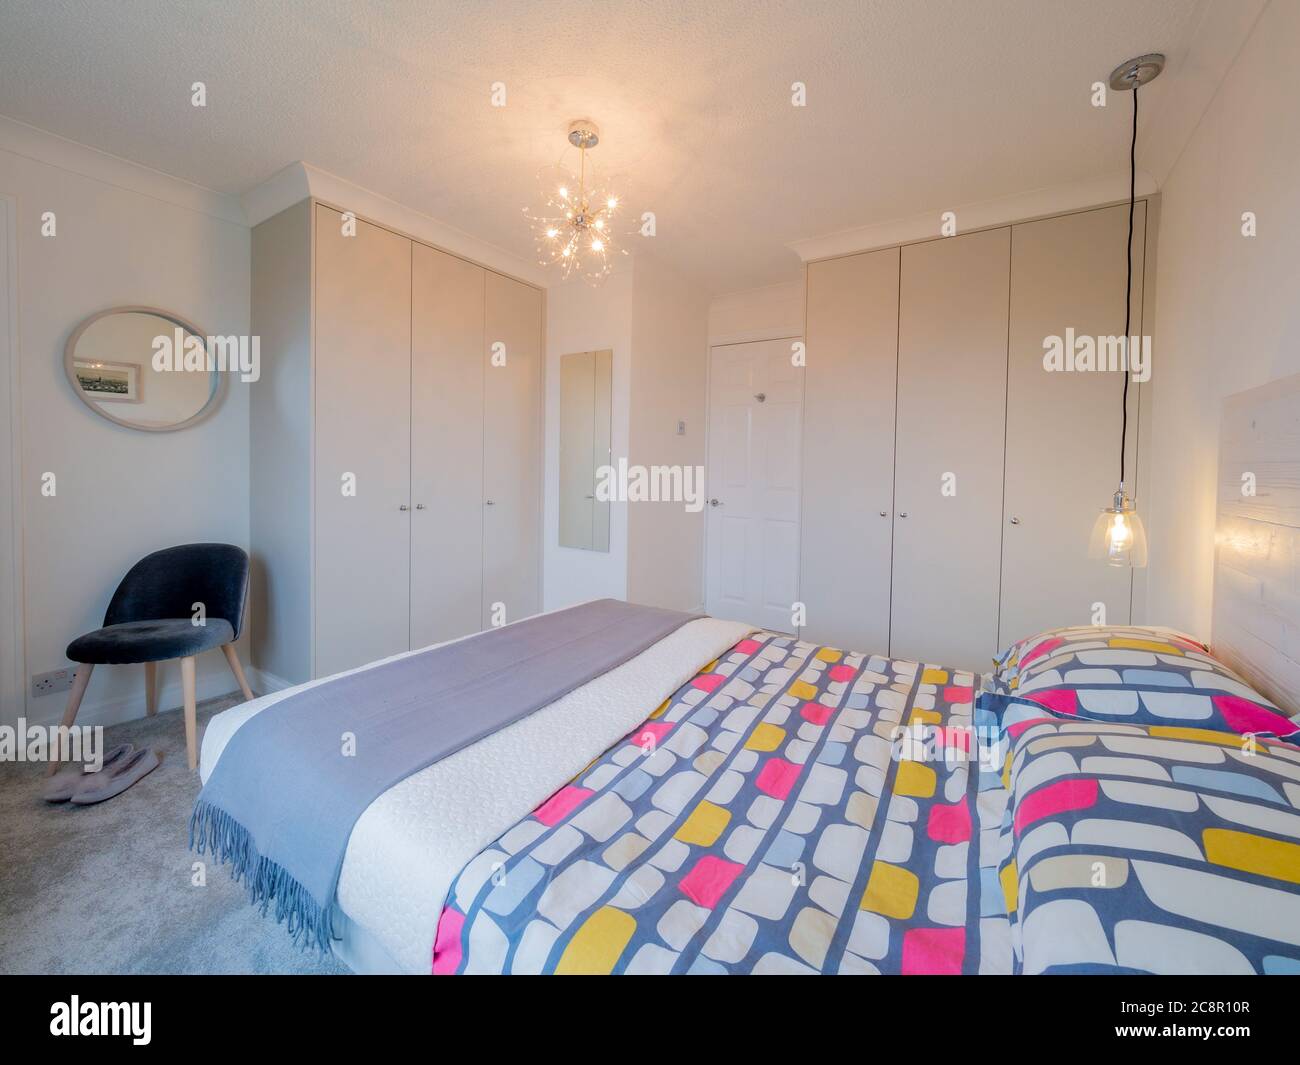 Bedroom interior with built in wardrobes Stock Photo